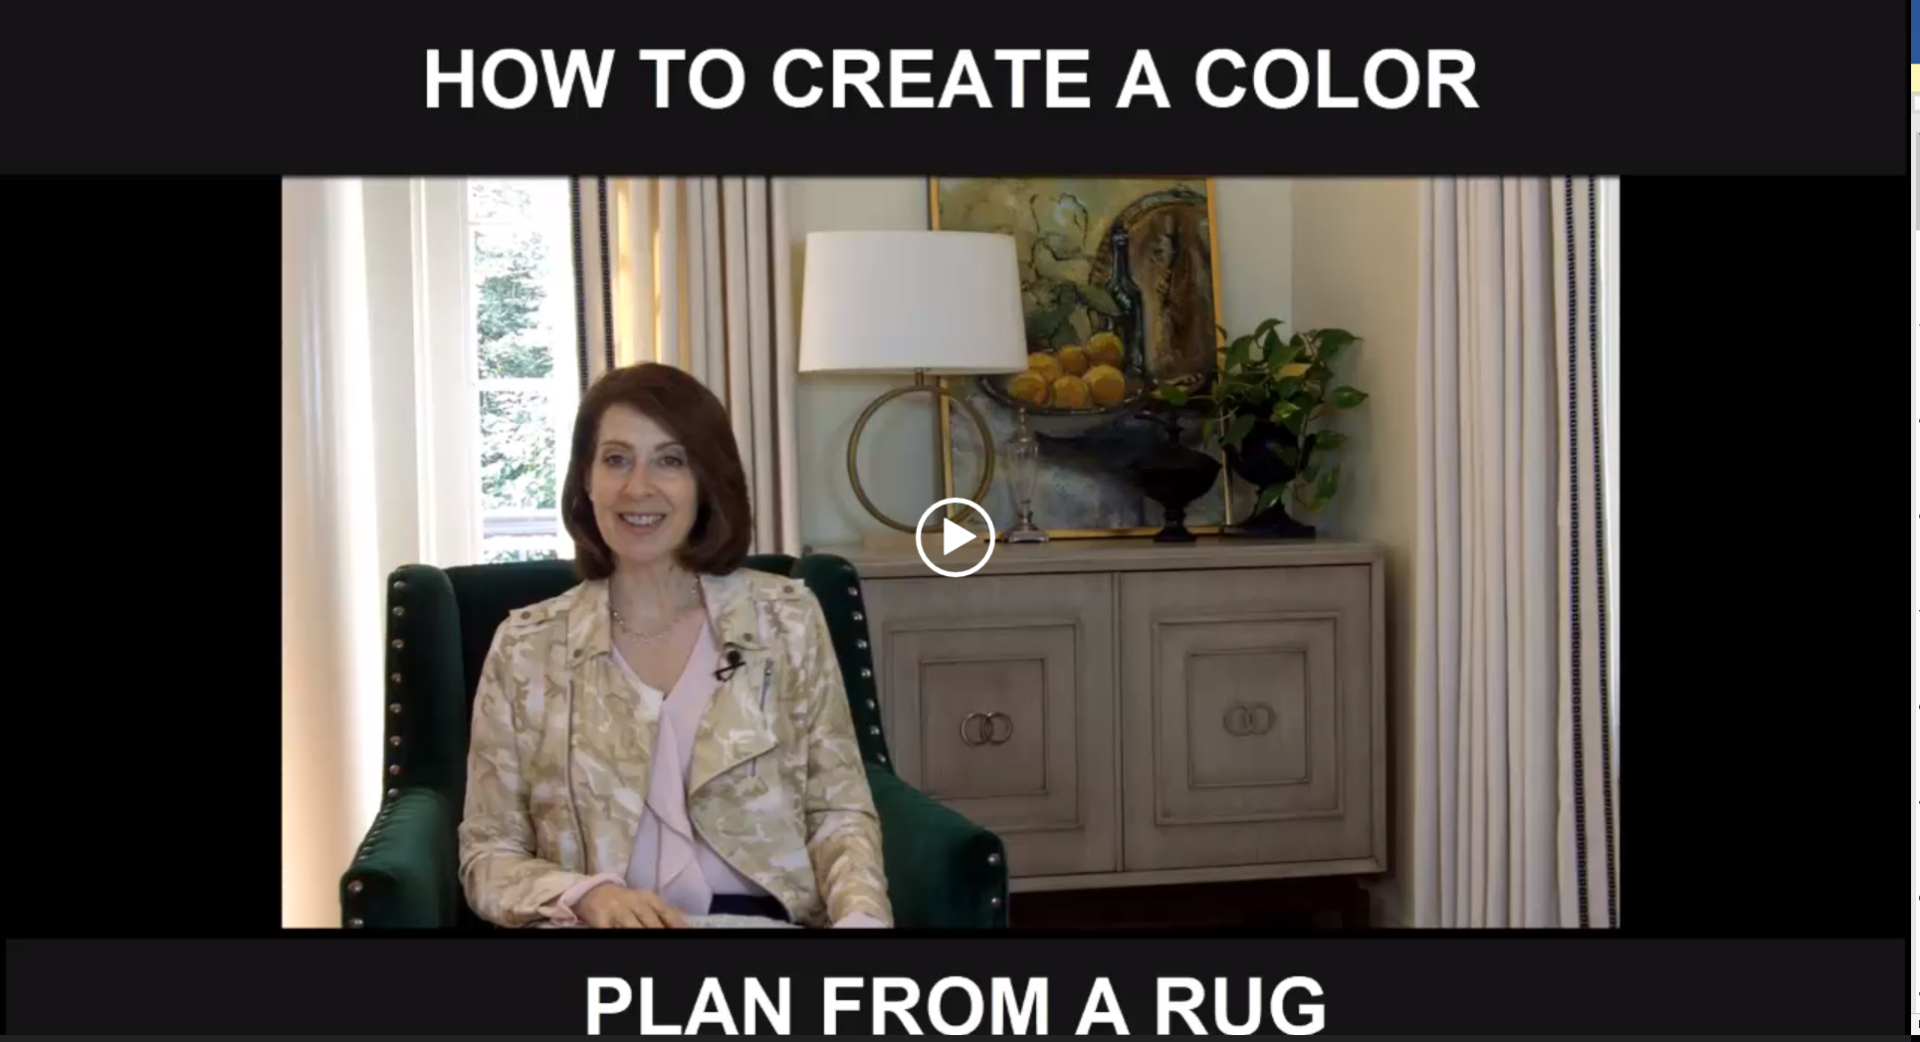 Creating a Room Color Plan from a Rug